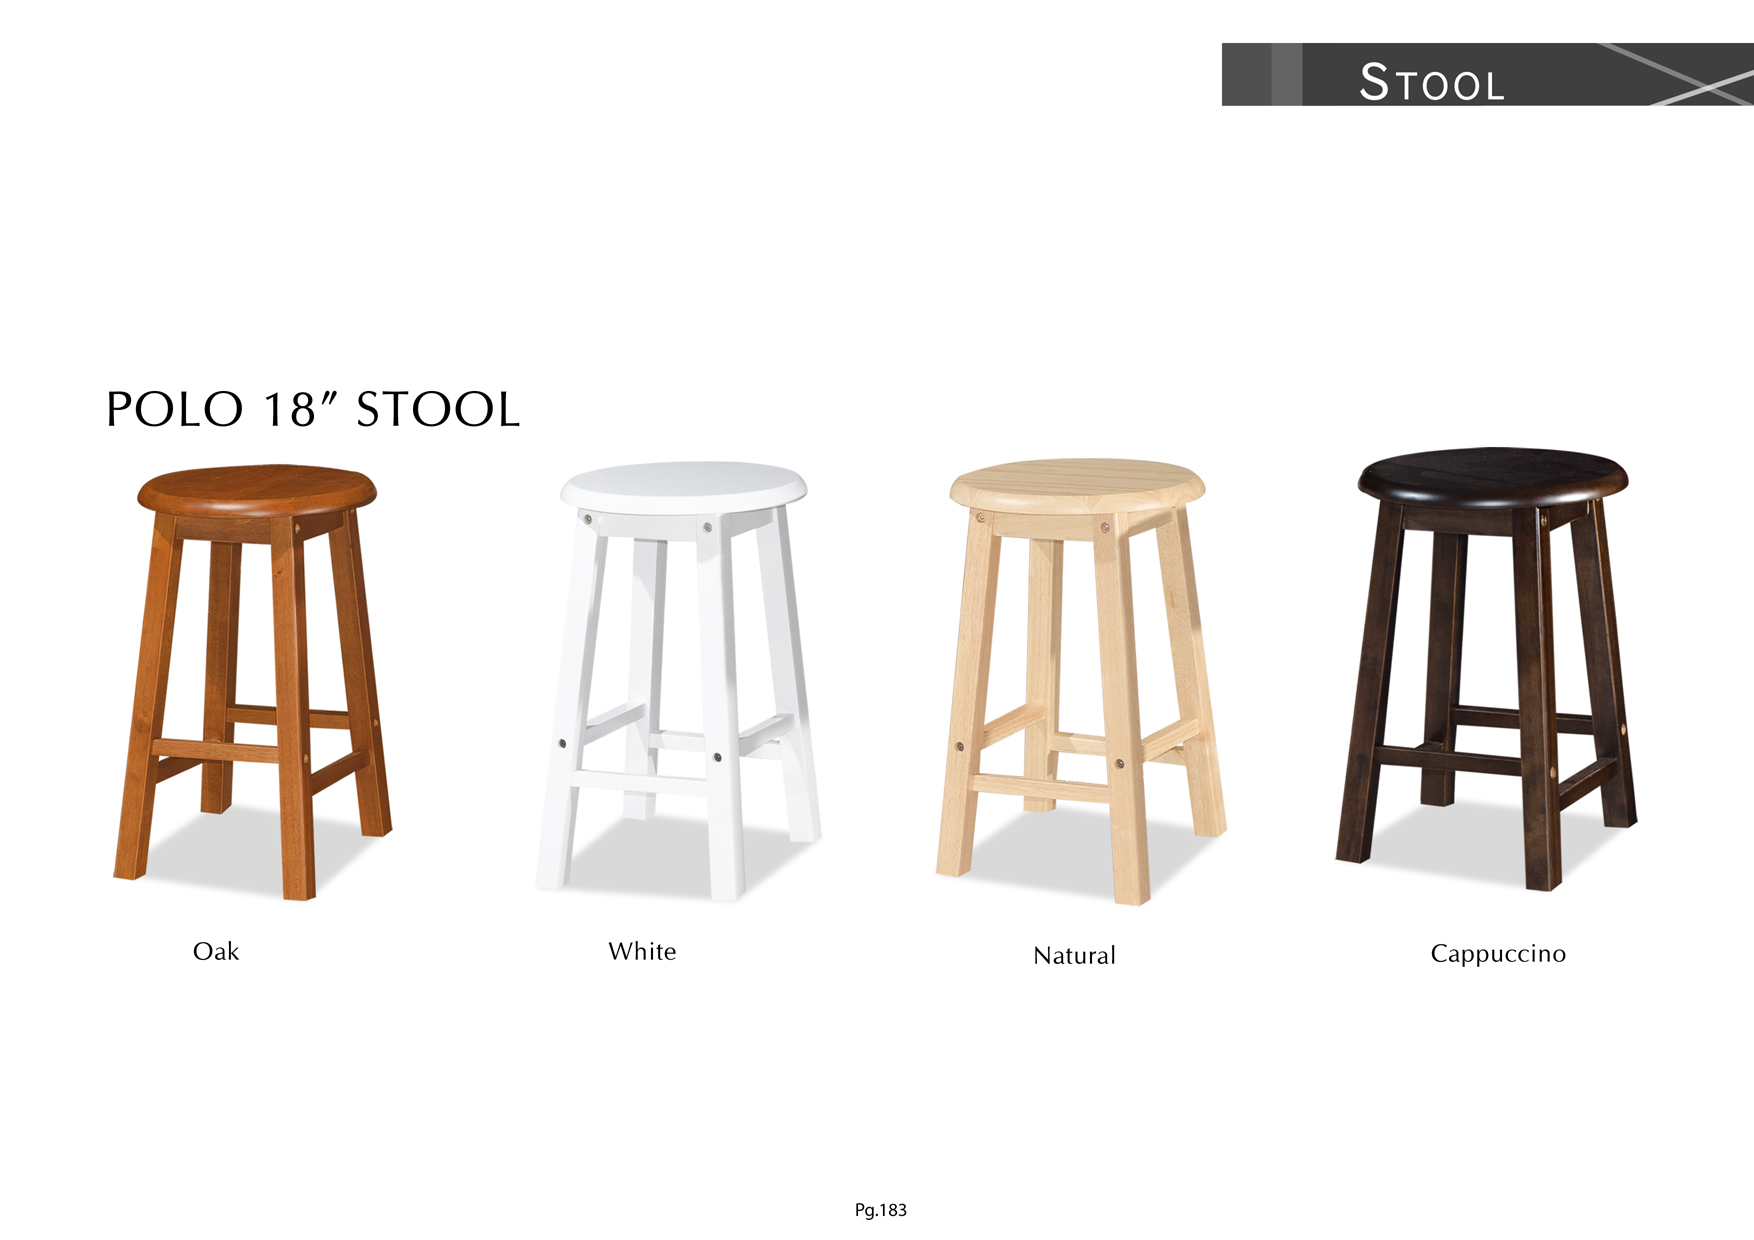 Product: PG183. POLO 18 STOOL